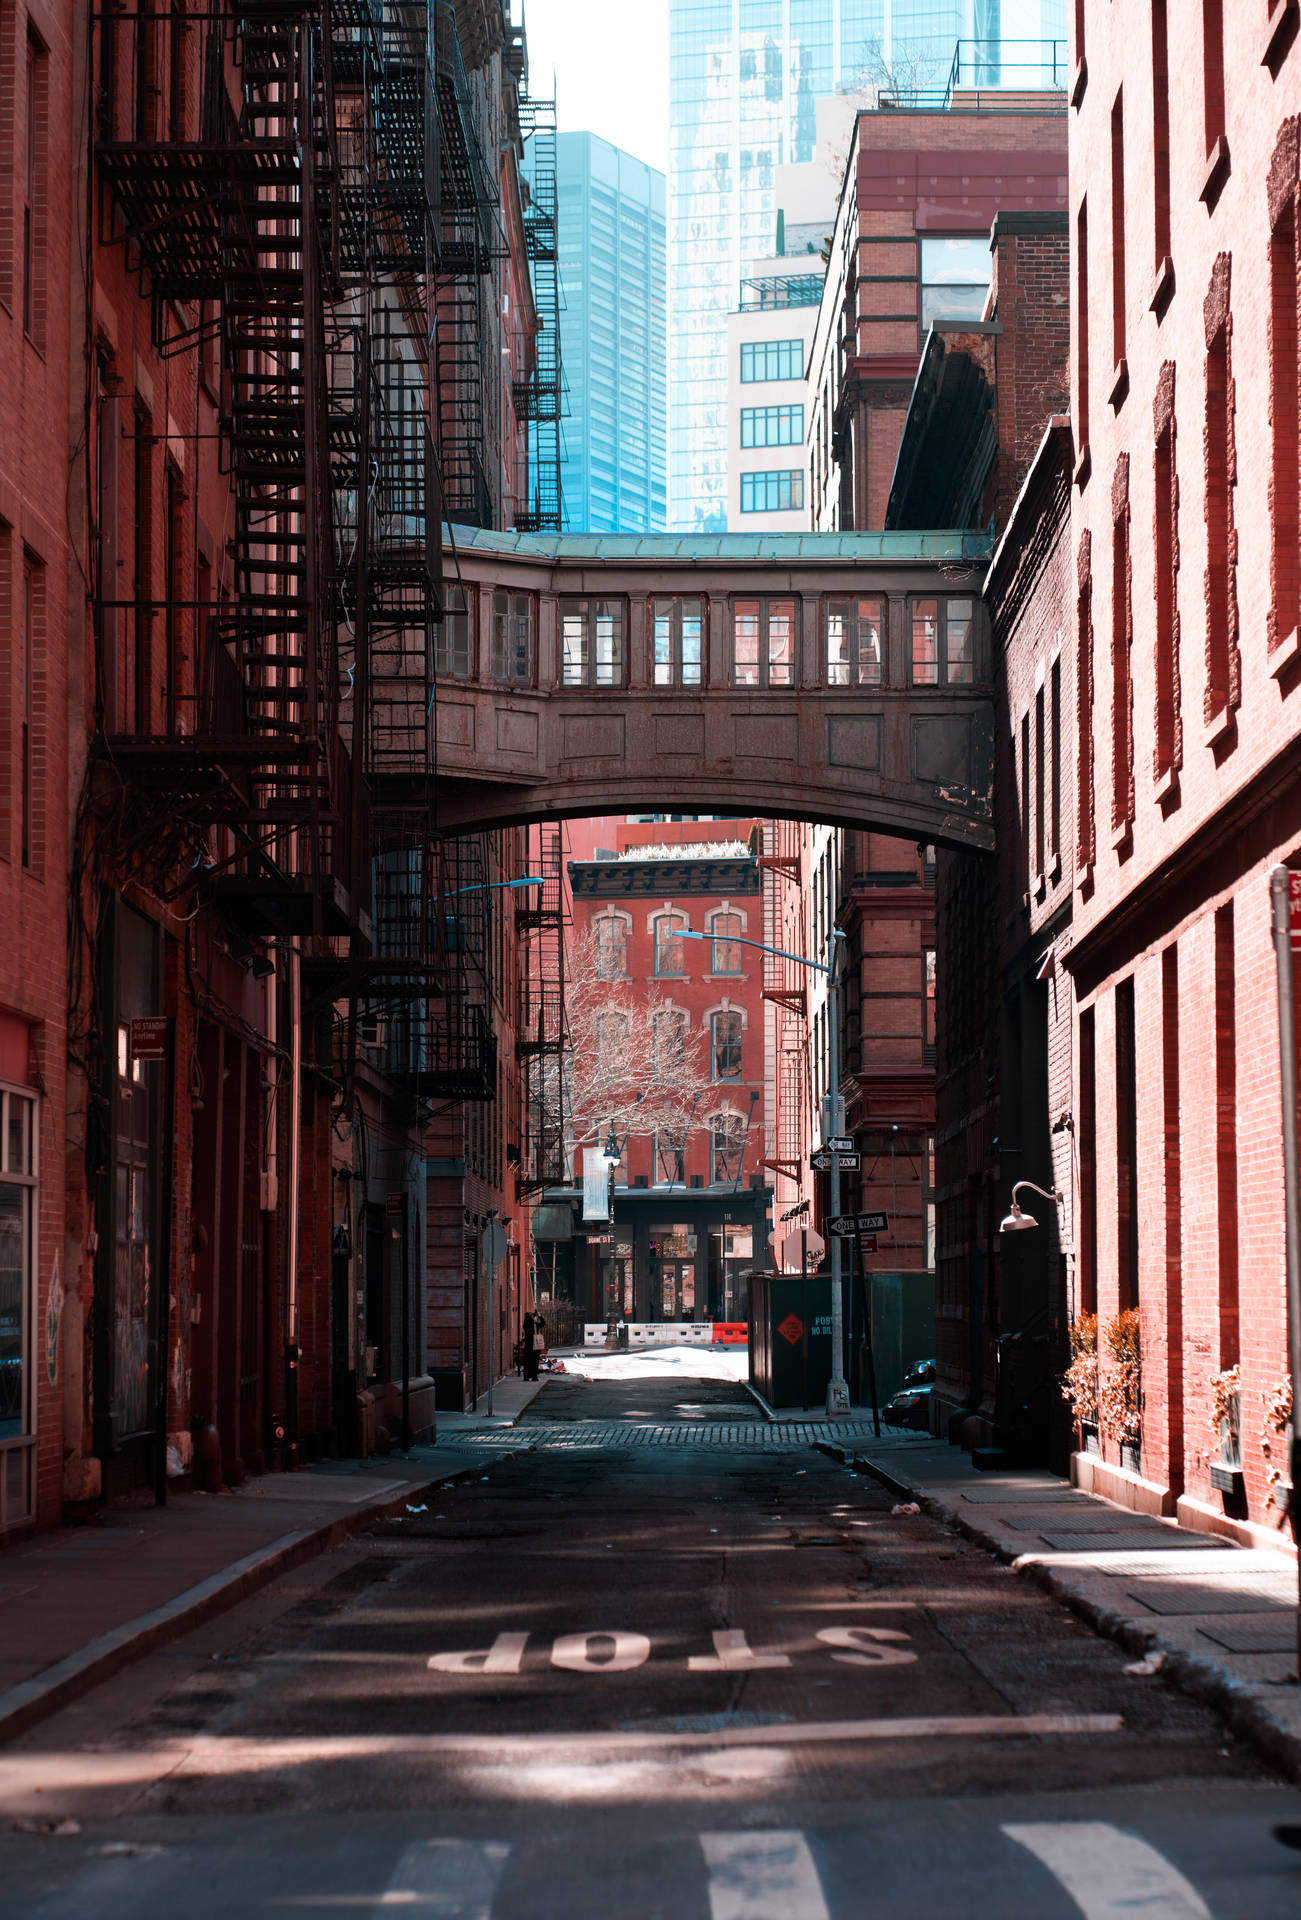 Wander Down A Brown Vintage Street And Let Your Mind Wander Background